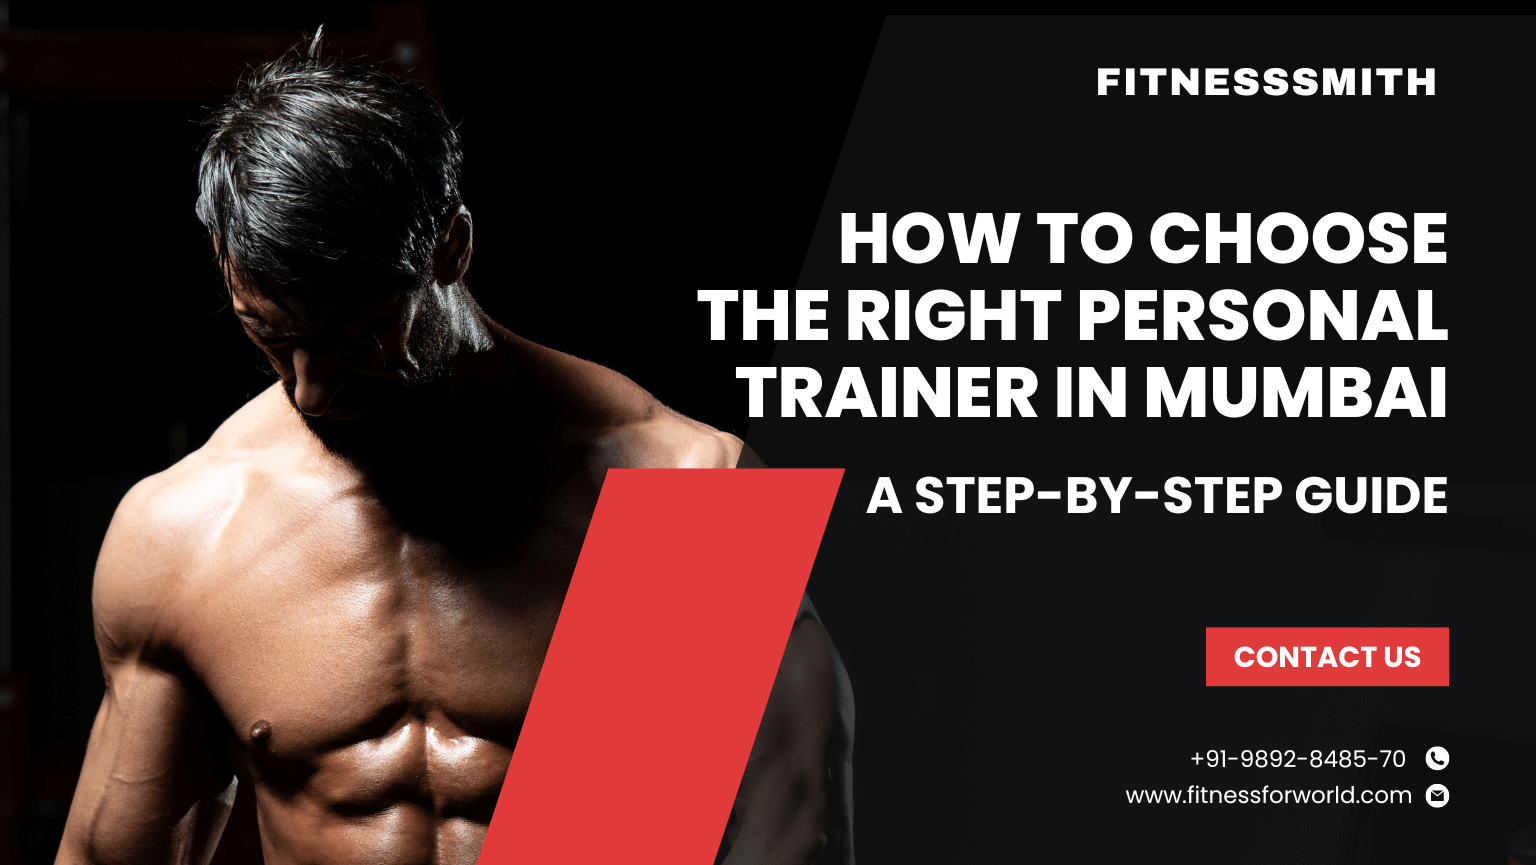 How to Choose the Right Personal Trainer in Mumbai: A Step-by-Step Guide